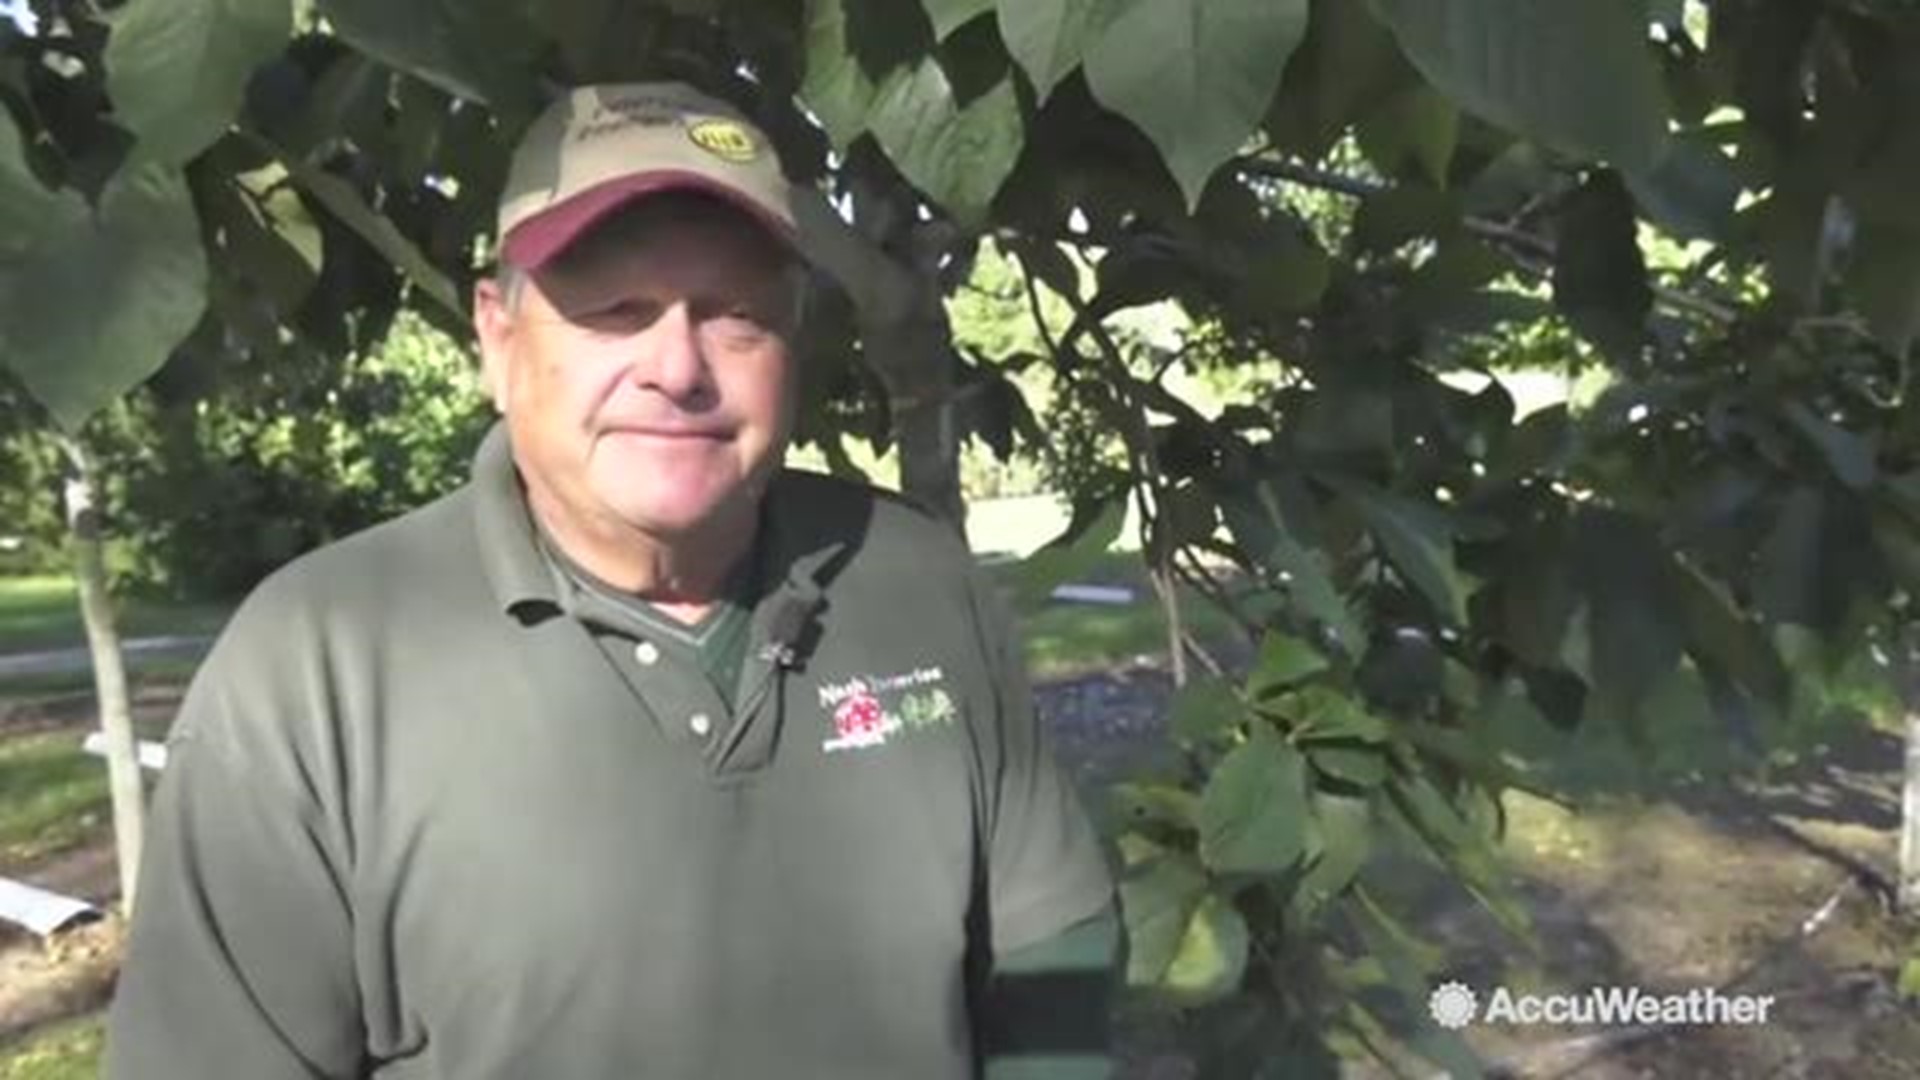 In Lower Michigan, harvesting has begun for the largest native fruit east of the Mississippi, the paw paw.  AccuWeather's Blake Naftel visited Nash Nurseries, which specializes in growing this fruit.